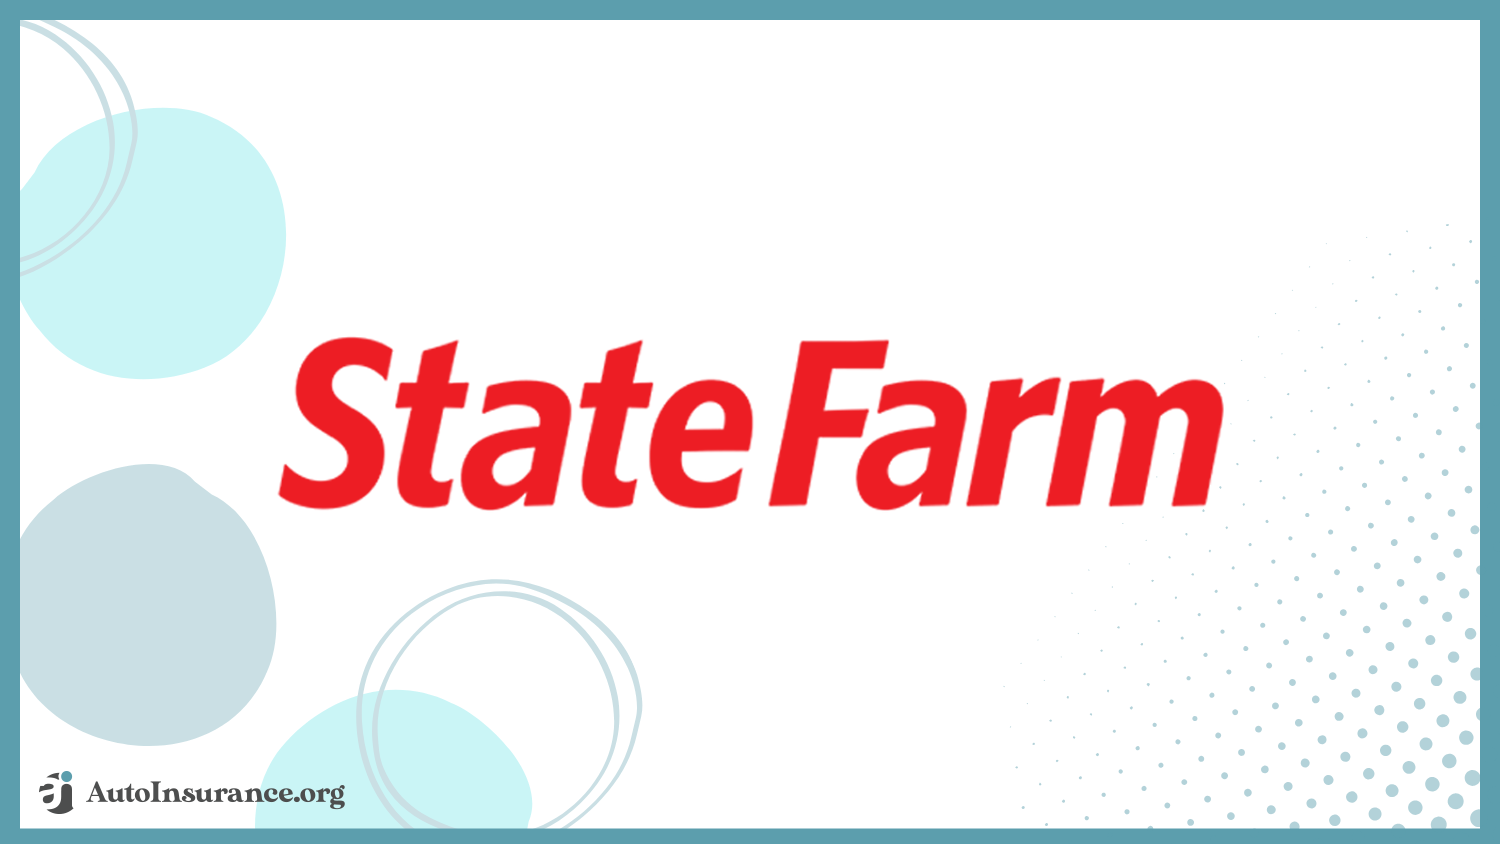 State Farm: Best Auto Insurance for Drivers with Epilepsy